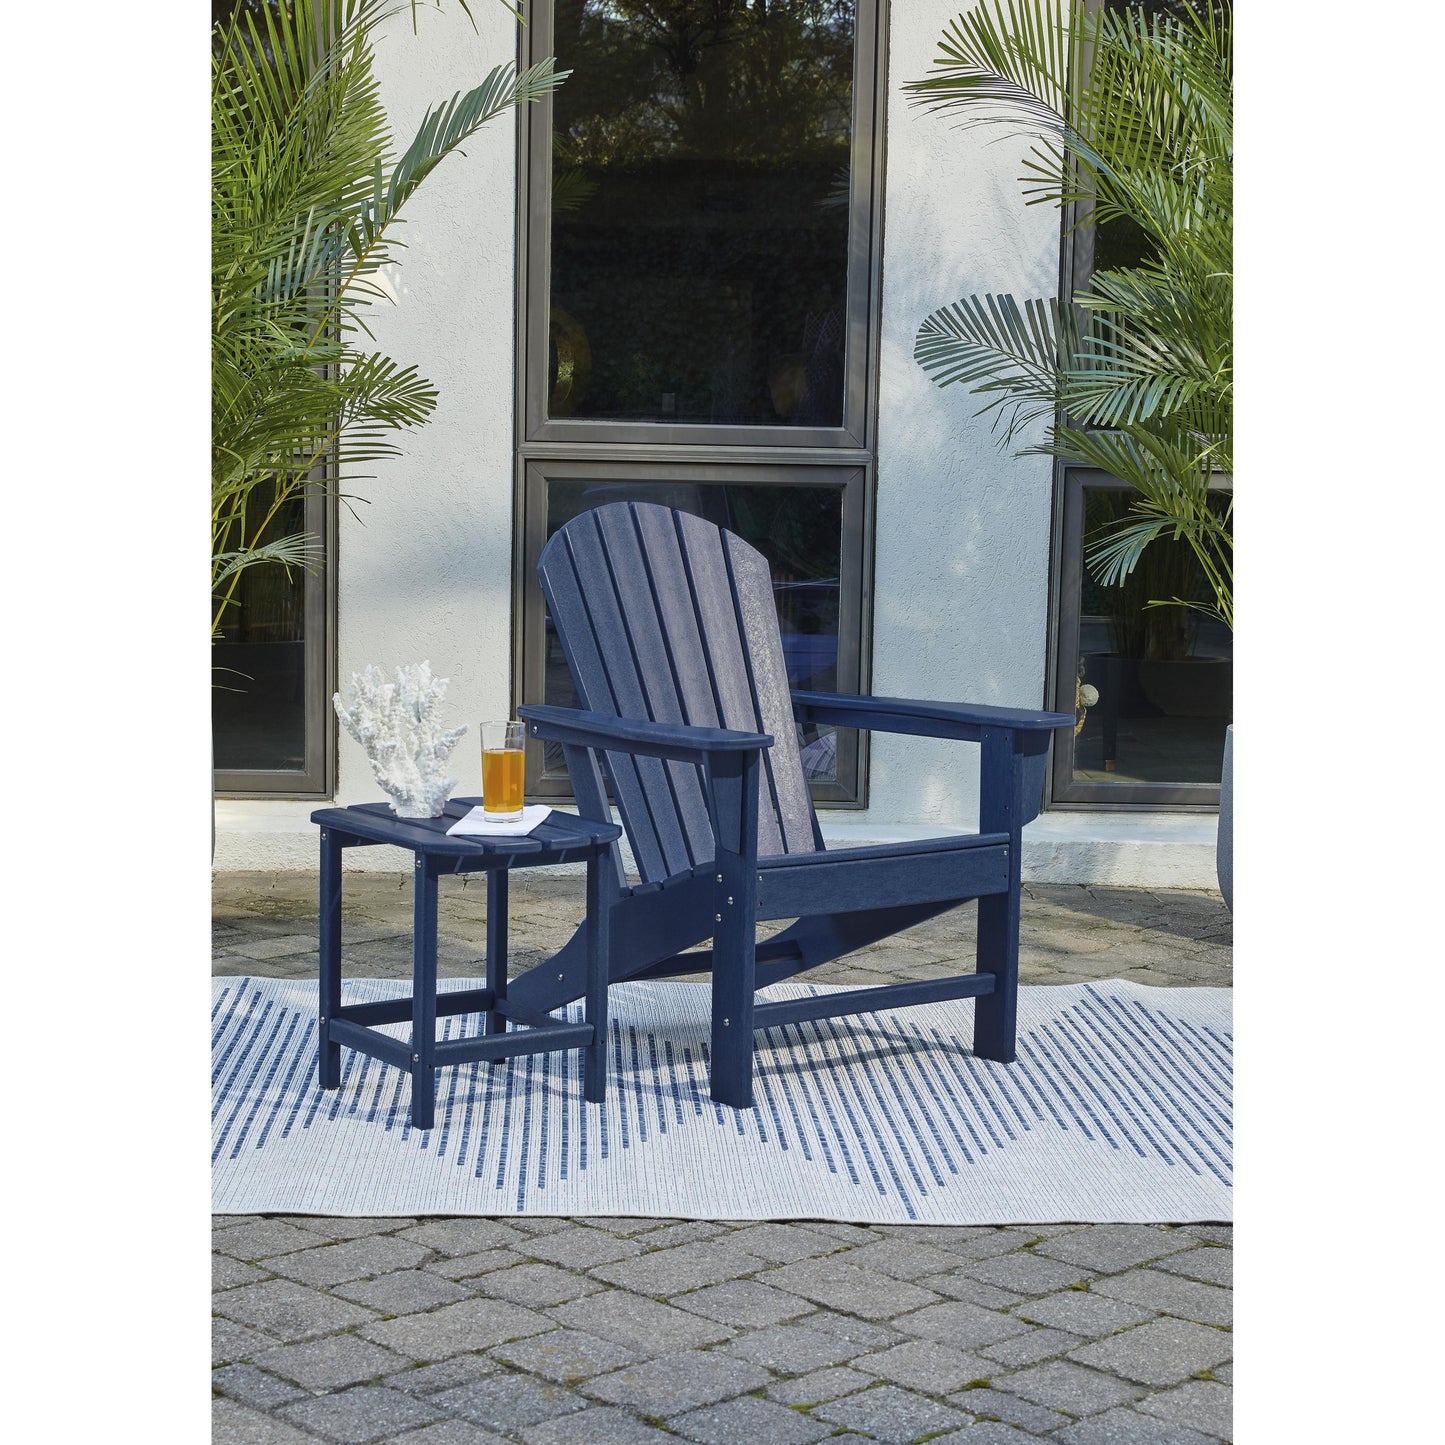 Signature Design by Ashley Outdoor Seating Adirondack Chairs P009-898 IMAGE 10